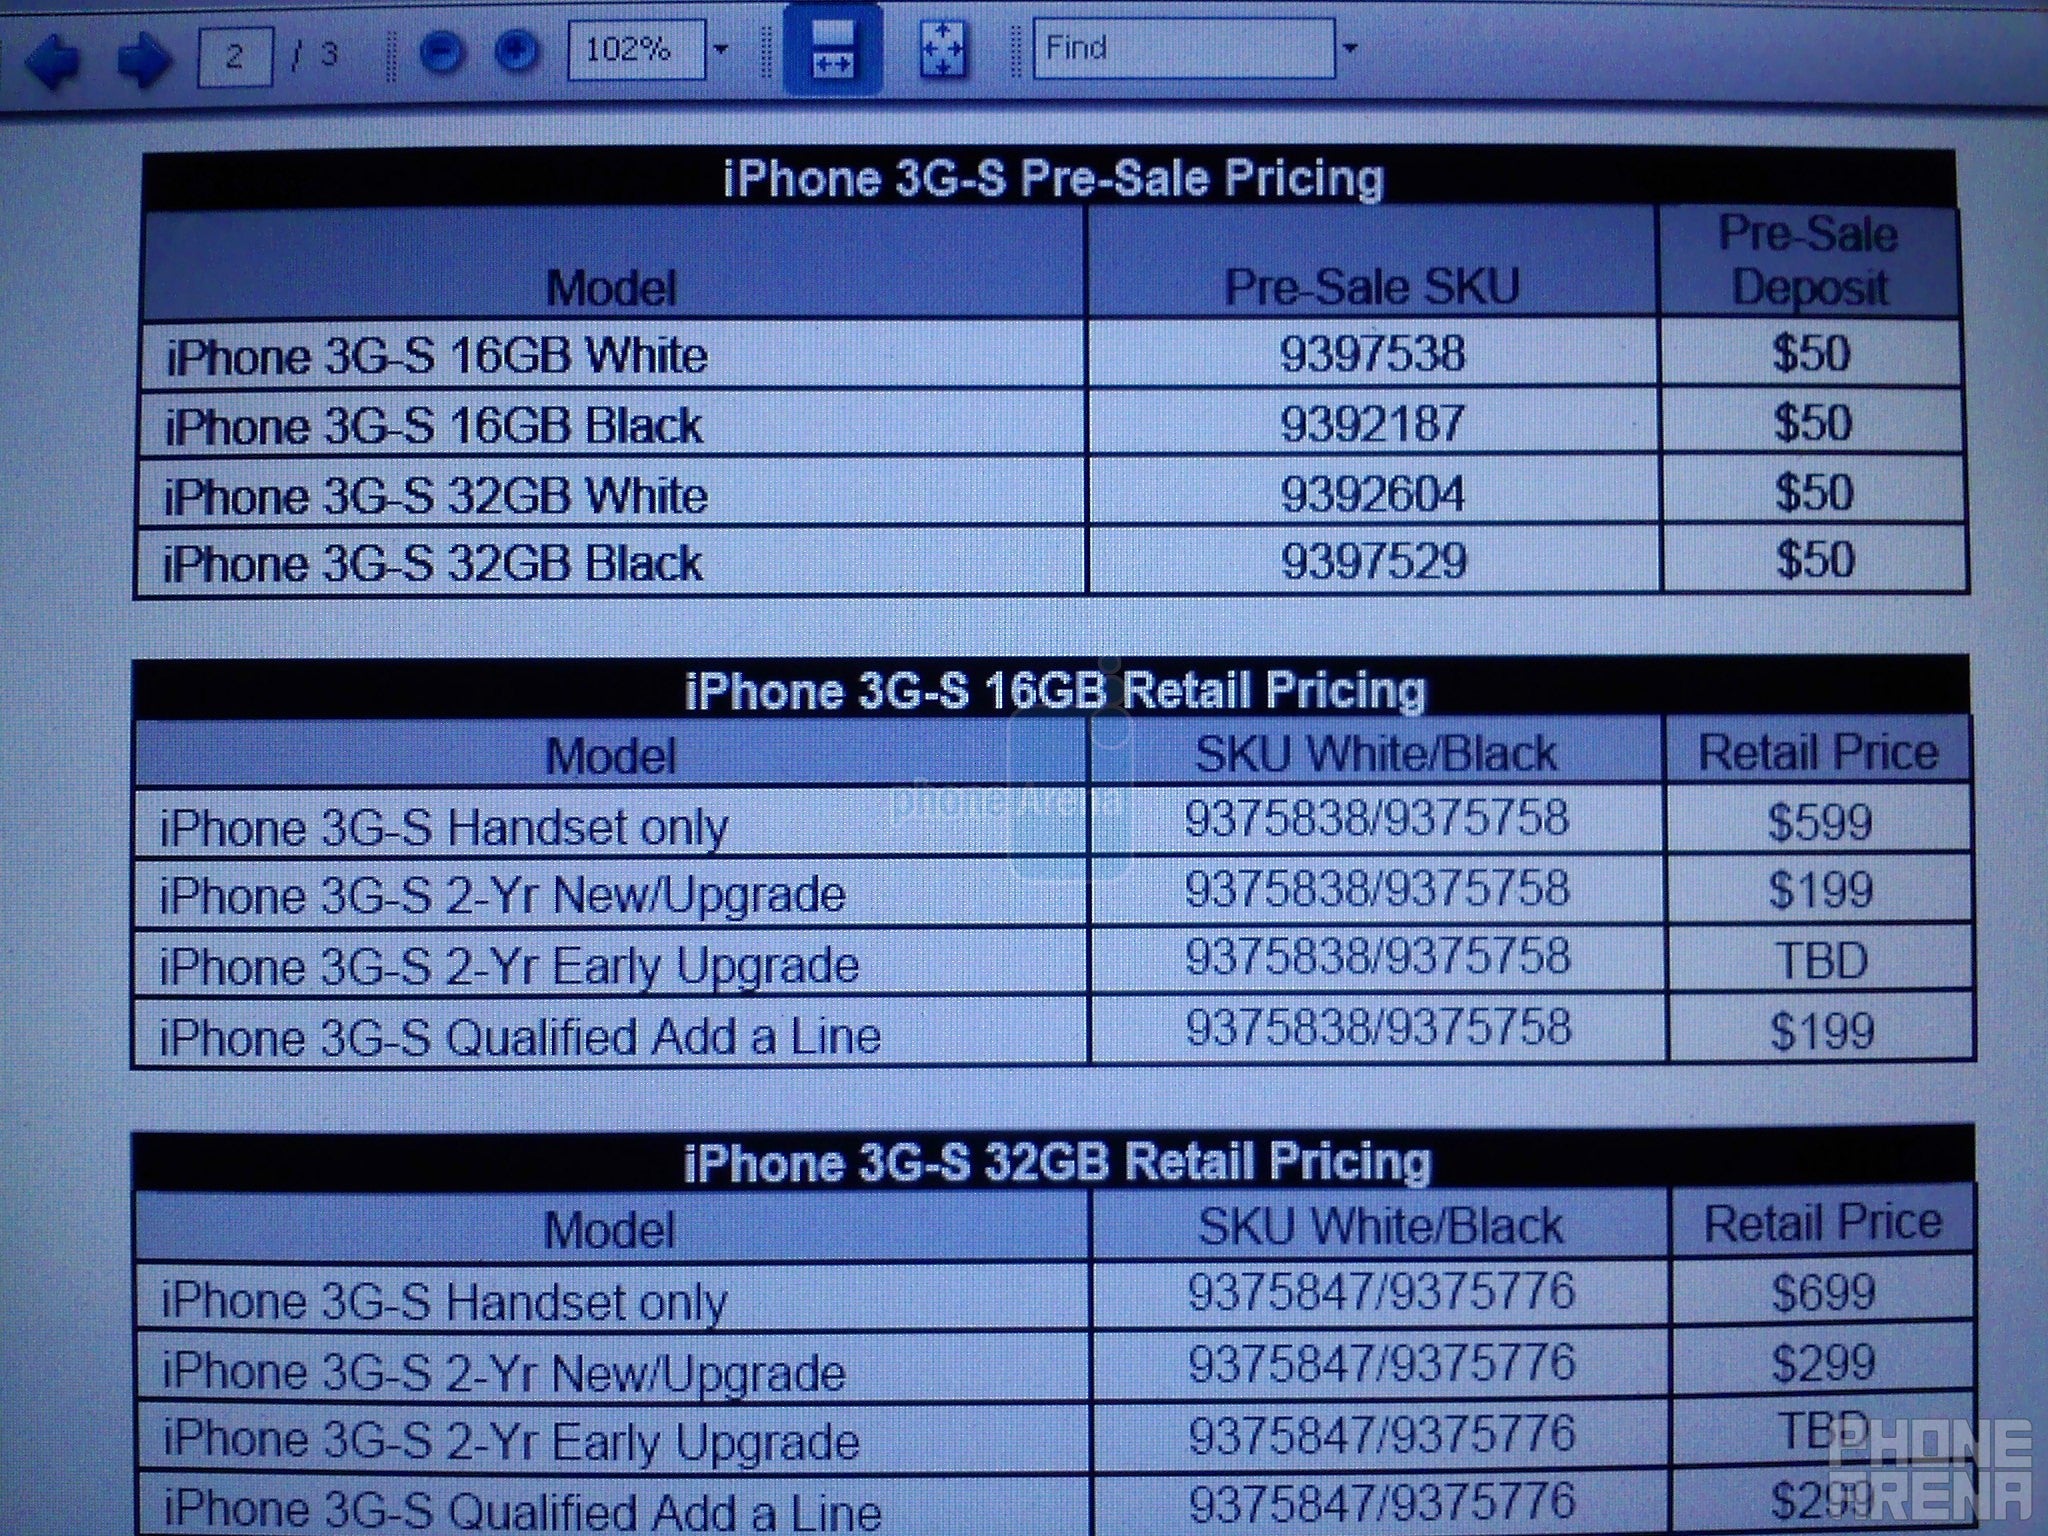 Best Buy offering pre-orders on all new versions of the iPhone 3G S